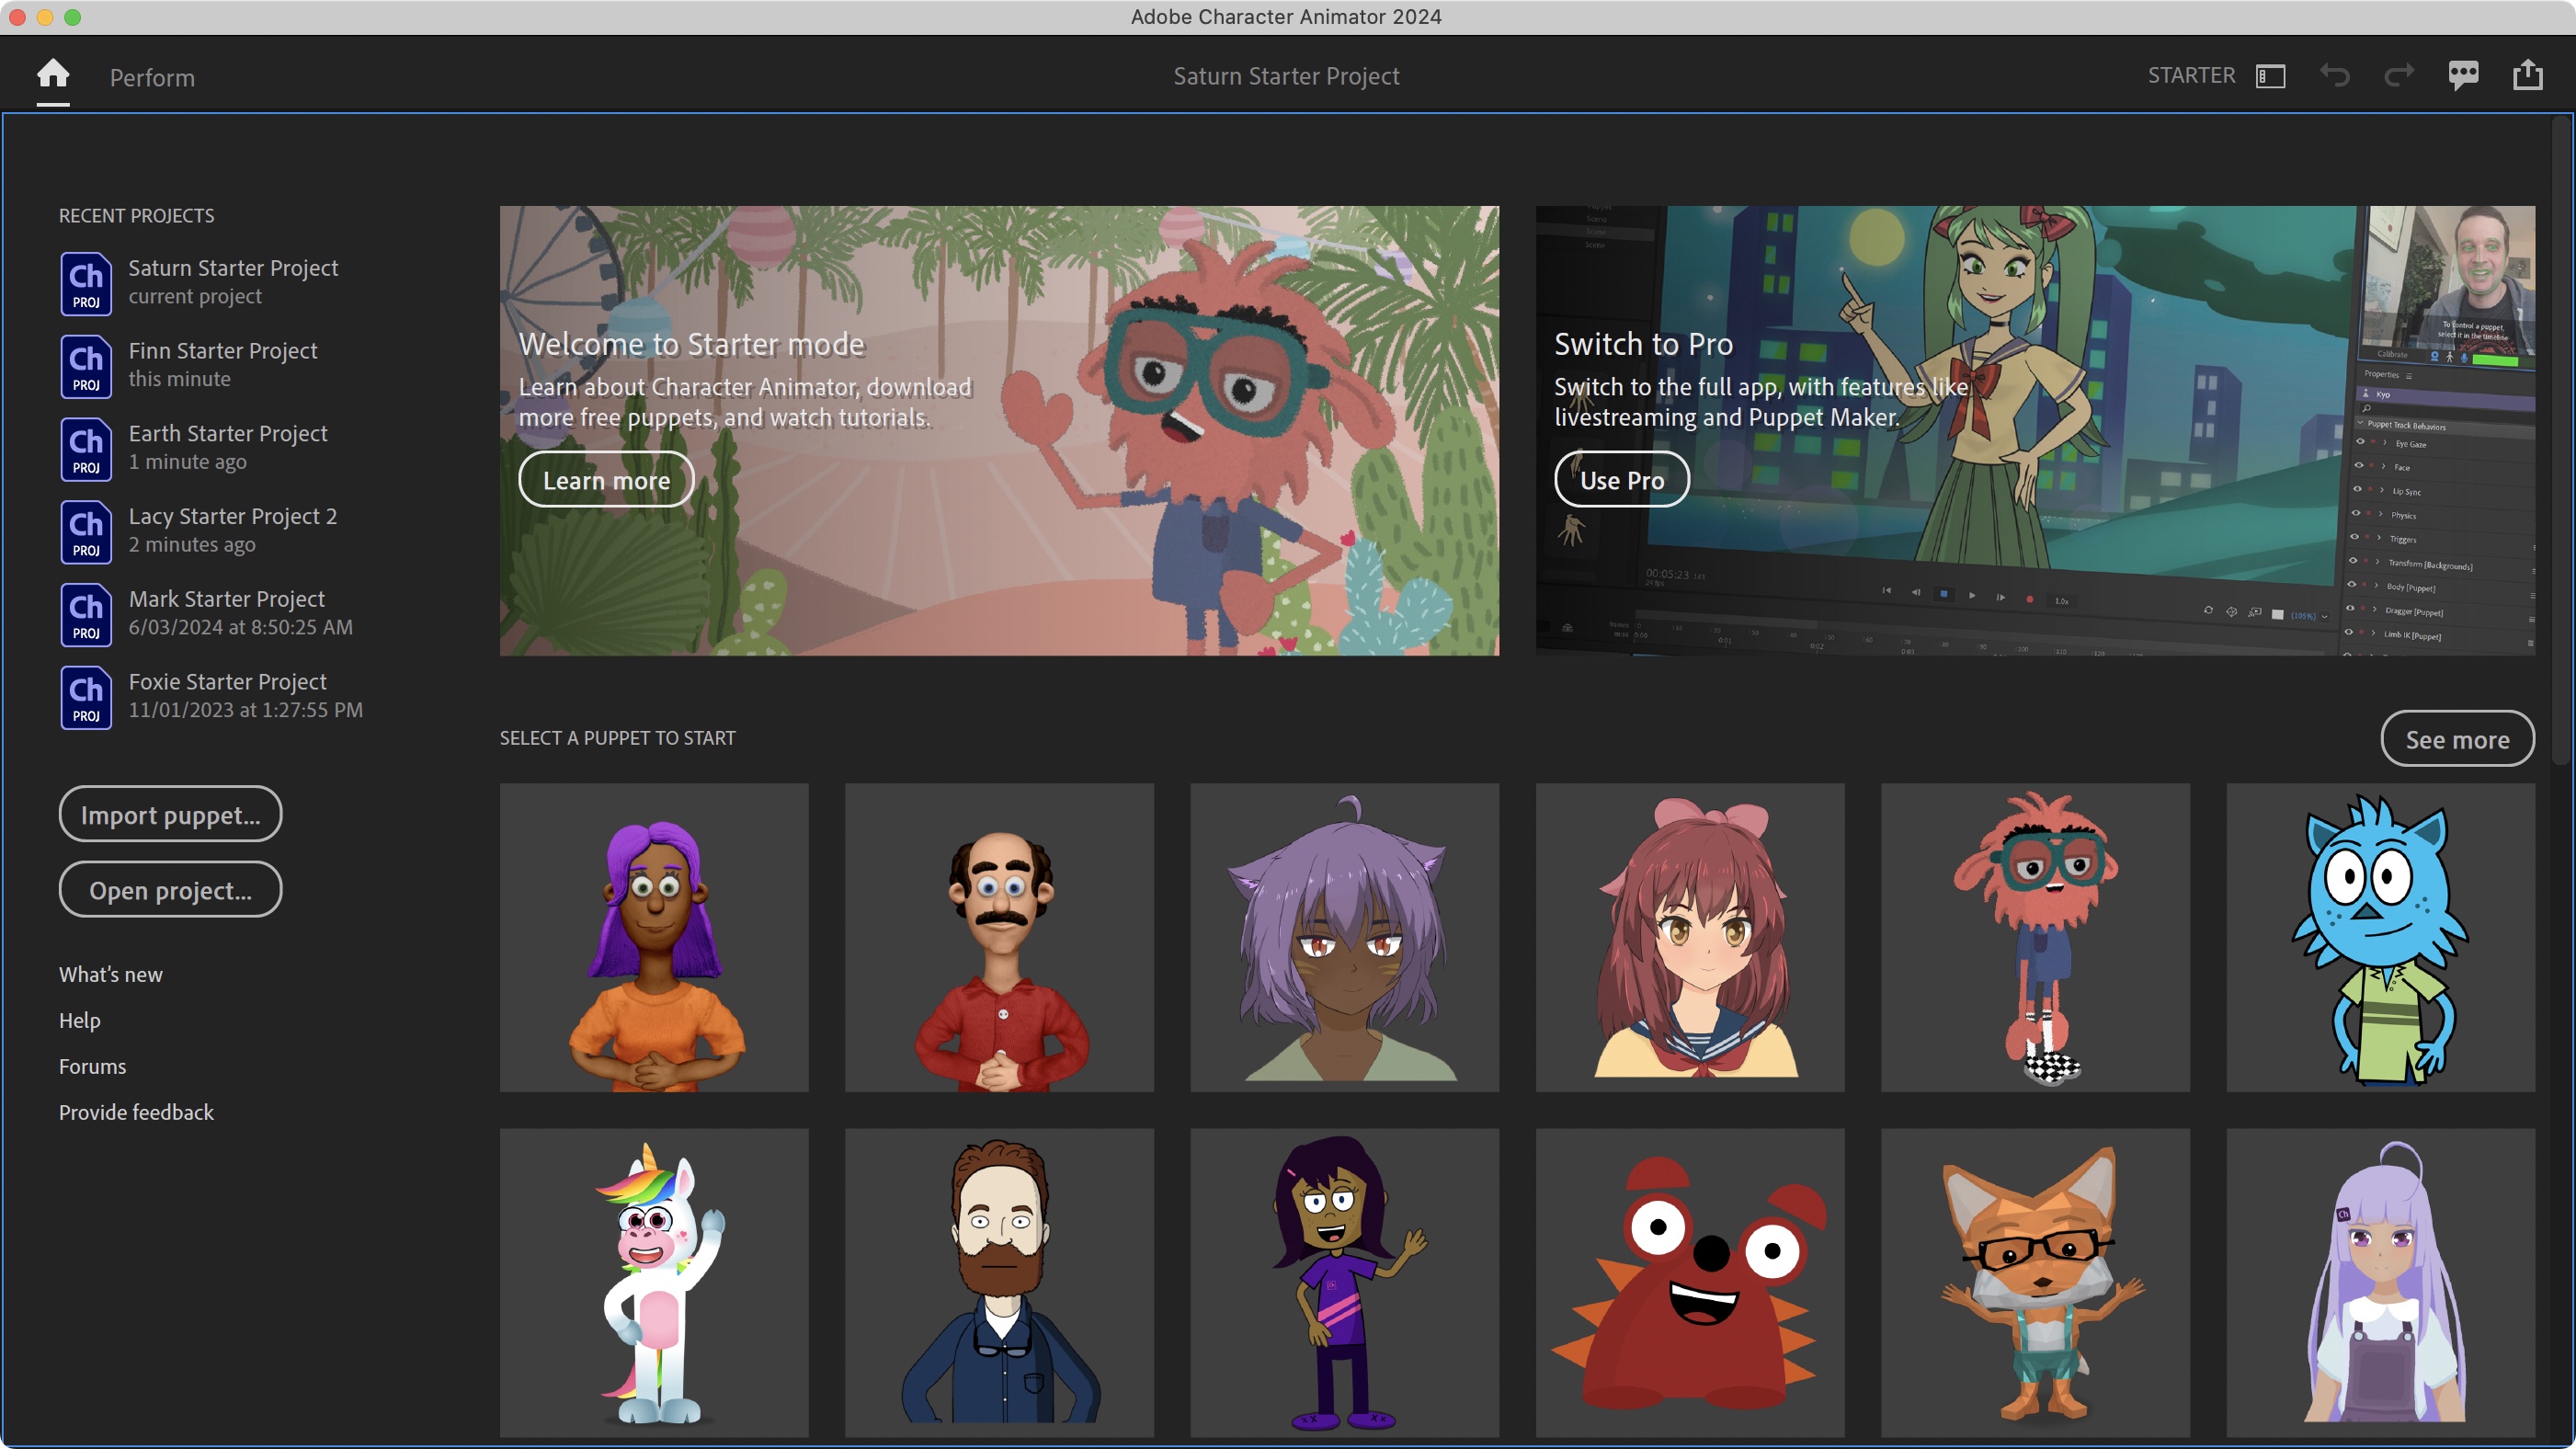 Adobe Character Animator during our review process